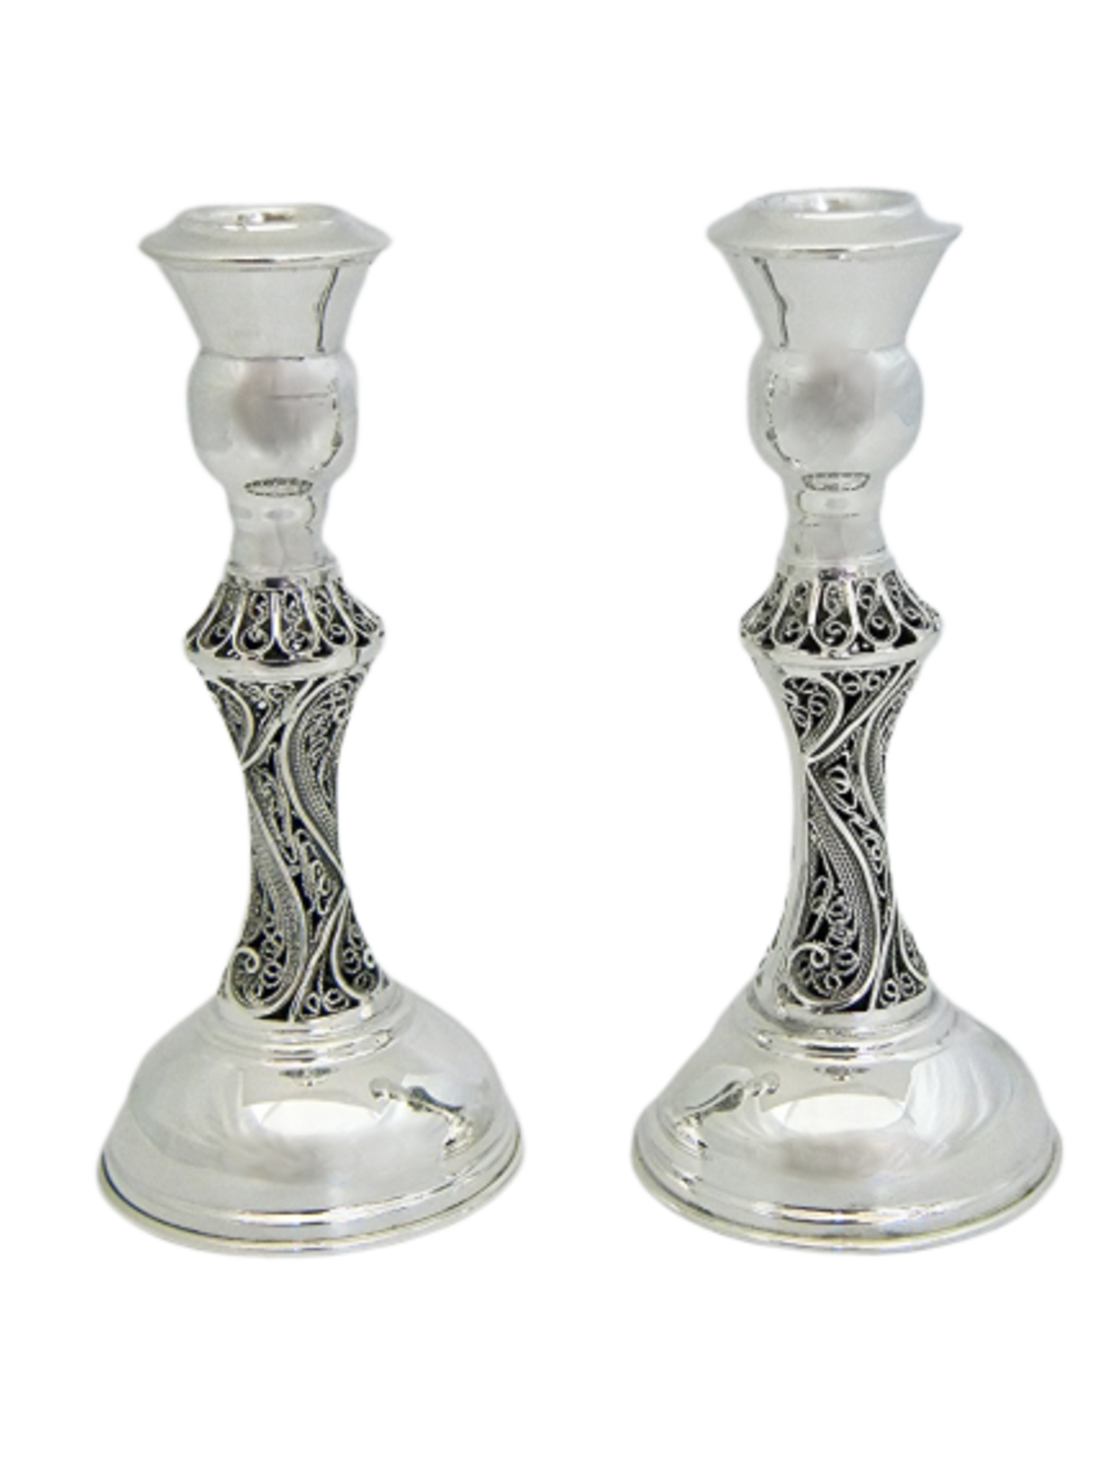 pure silver Popeye S candlesticks